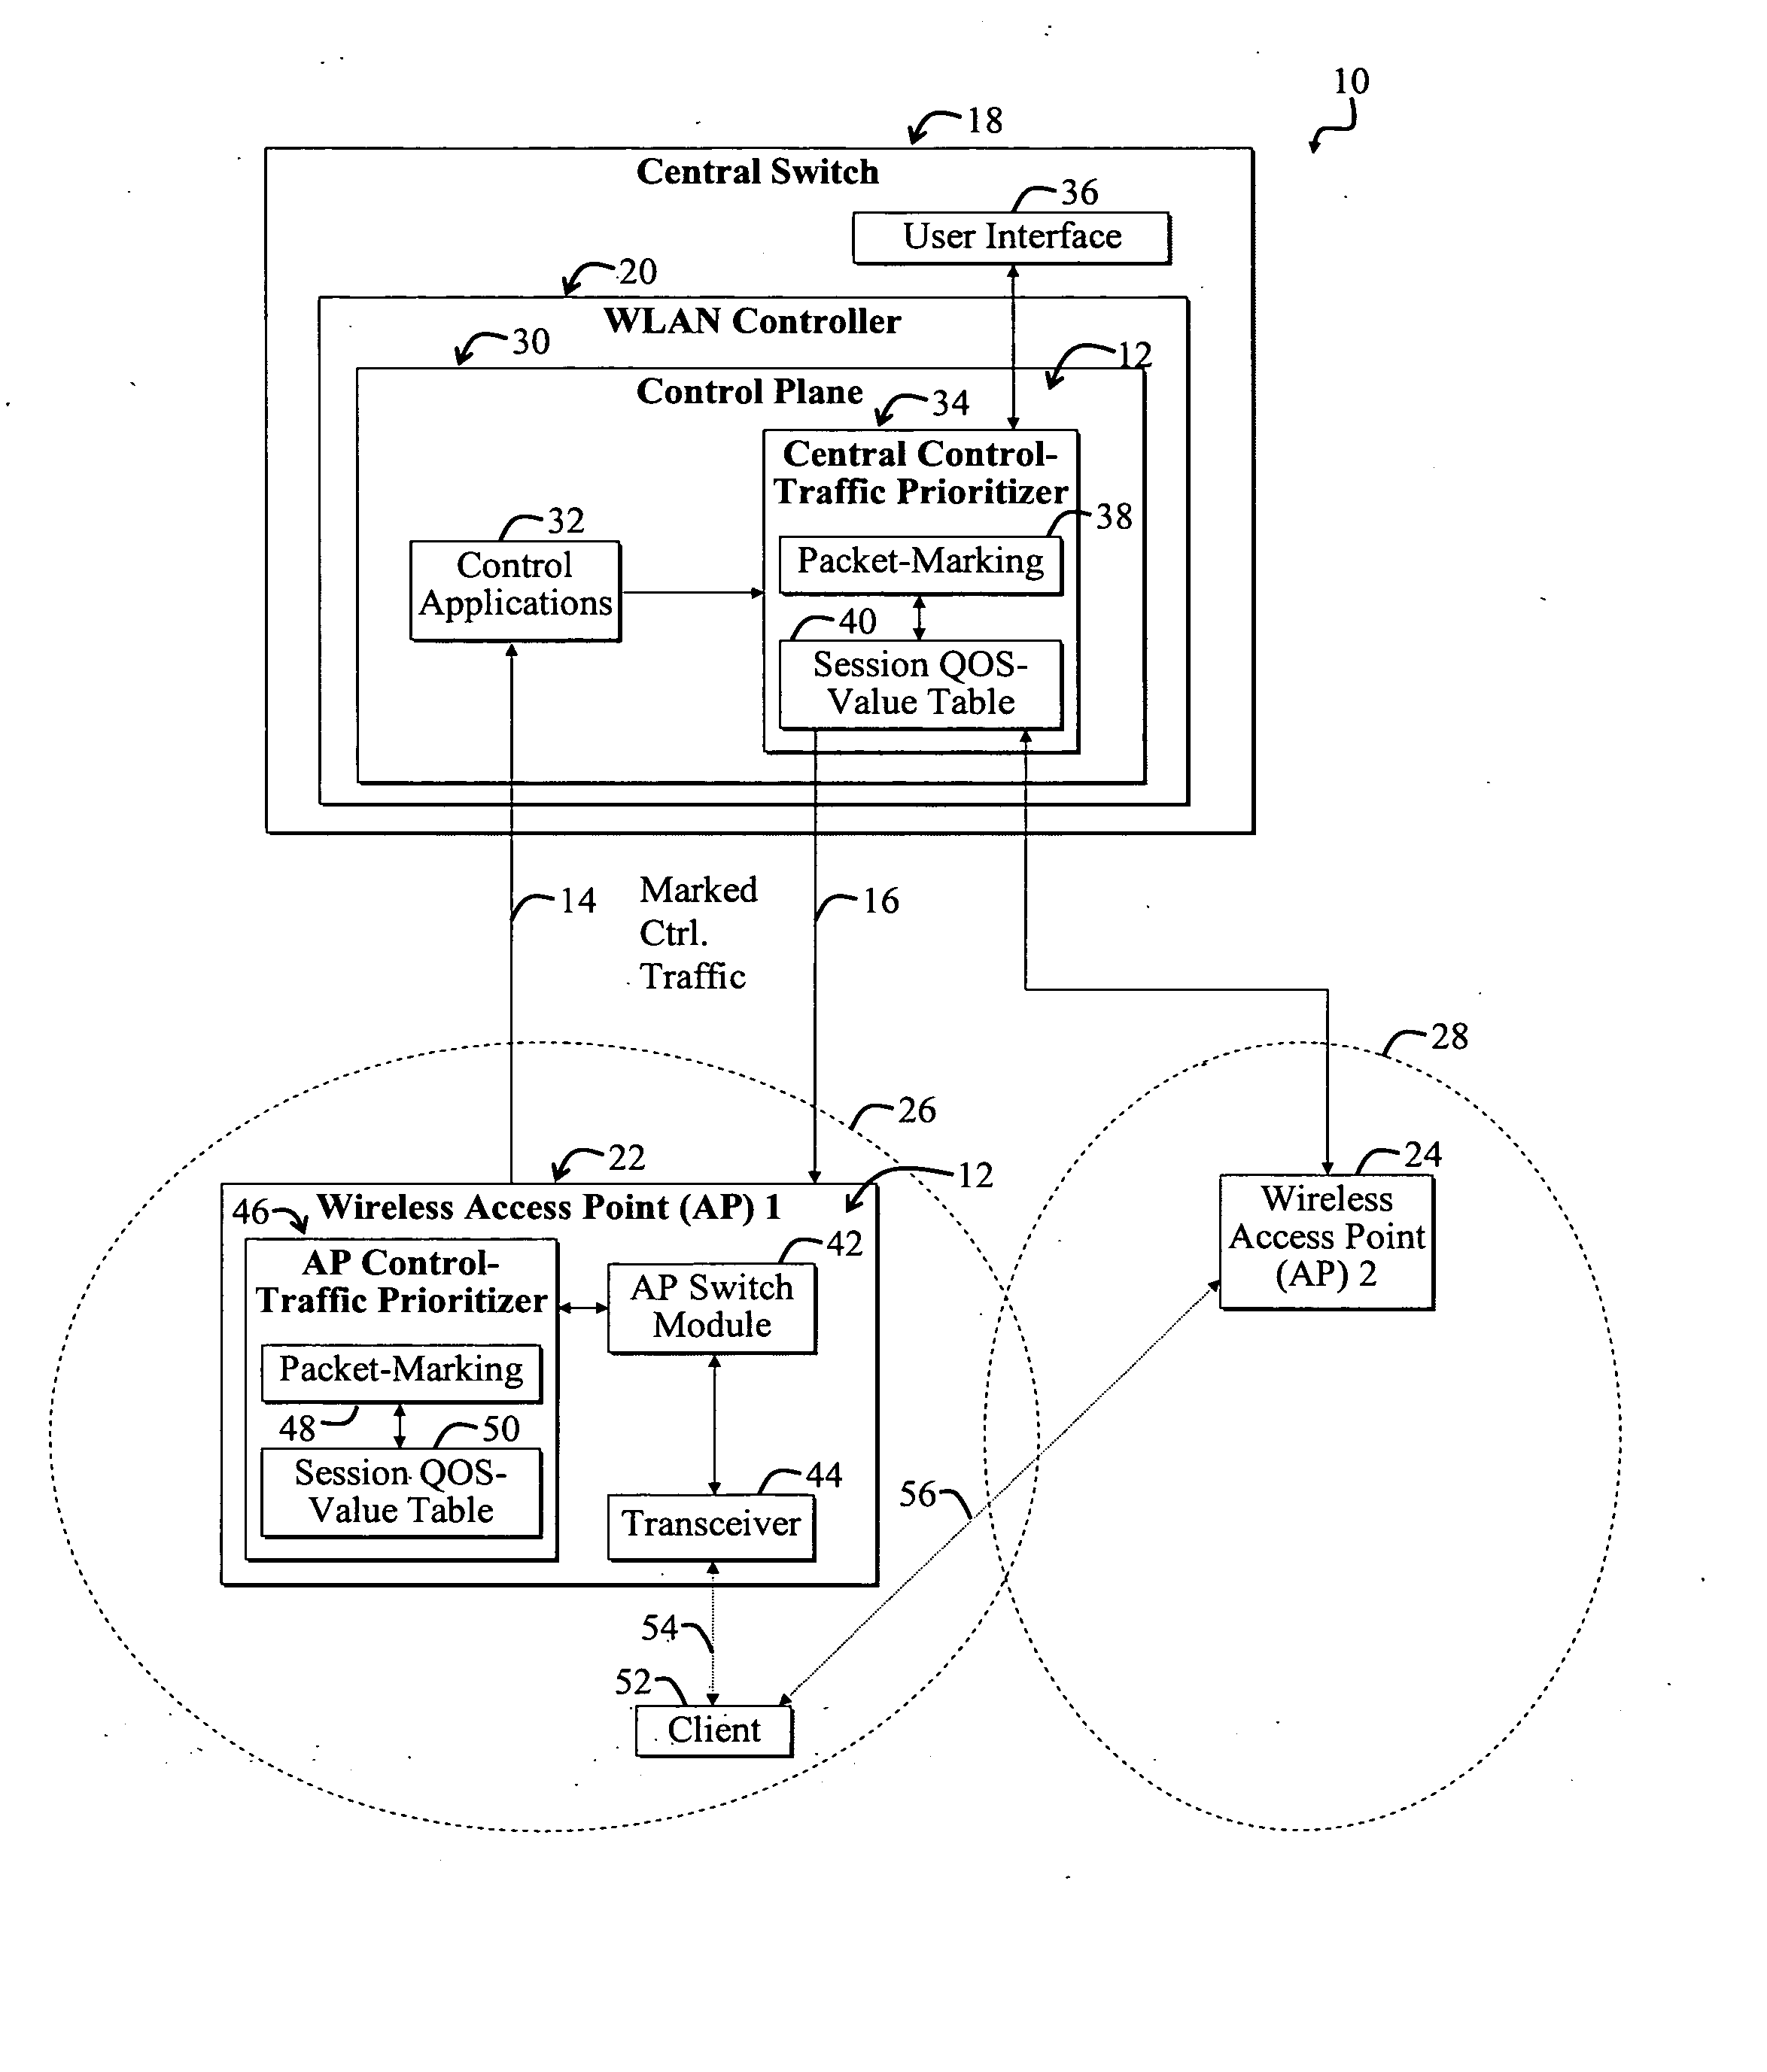 System and method for selectively manipulating control traffic to improve network performance